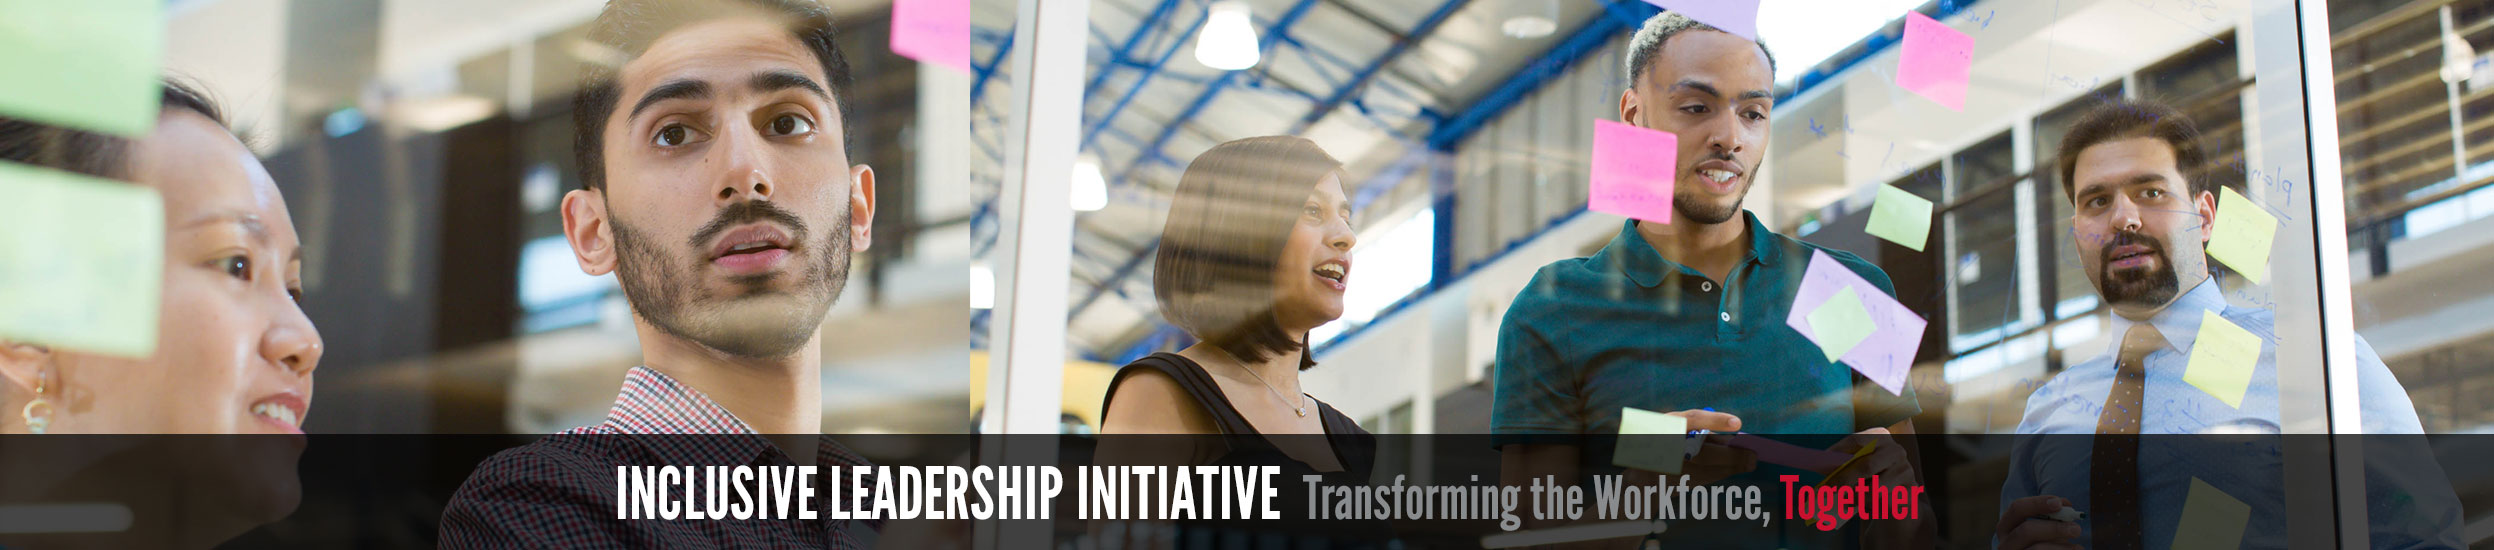 Inclusive Leadership Initiative: Transforming the Workforce, Together.